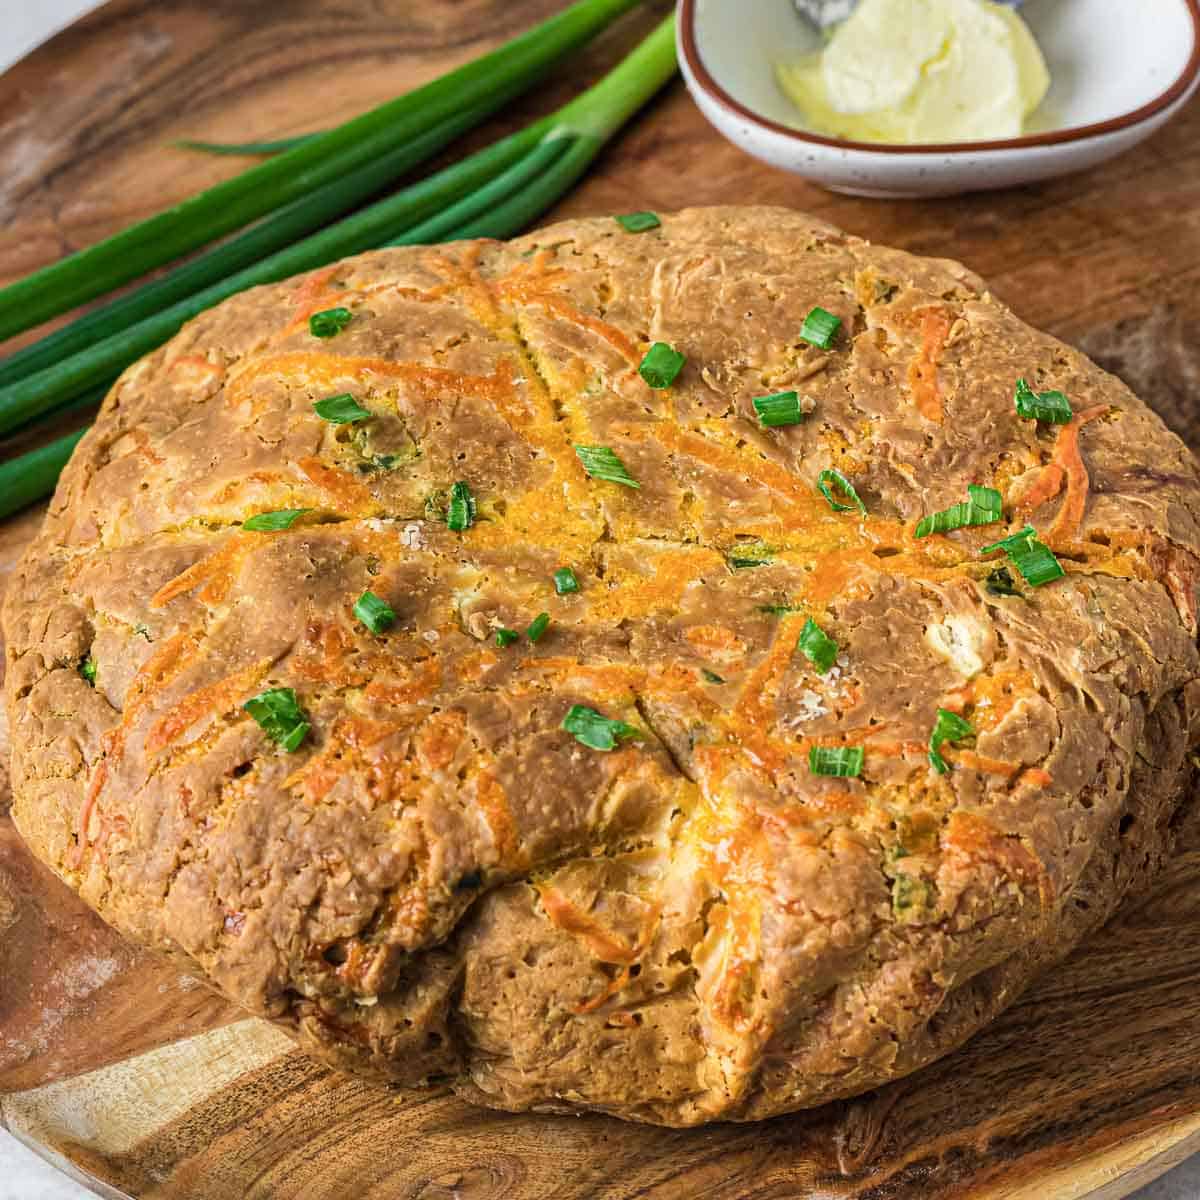 Side shot of whole loaf of cheddar bread garnished with chives on a wooden cutting board with whole chives and a plate of butter in the background.